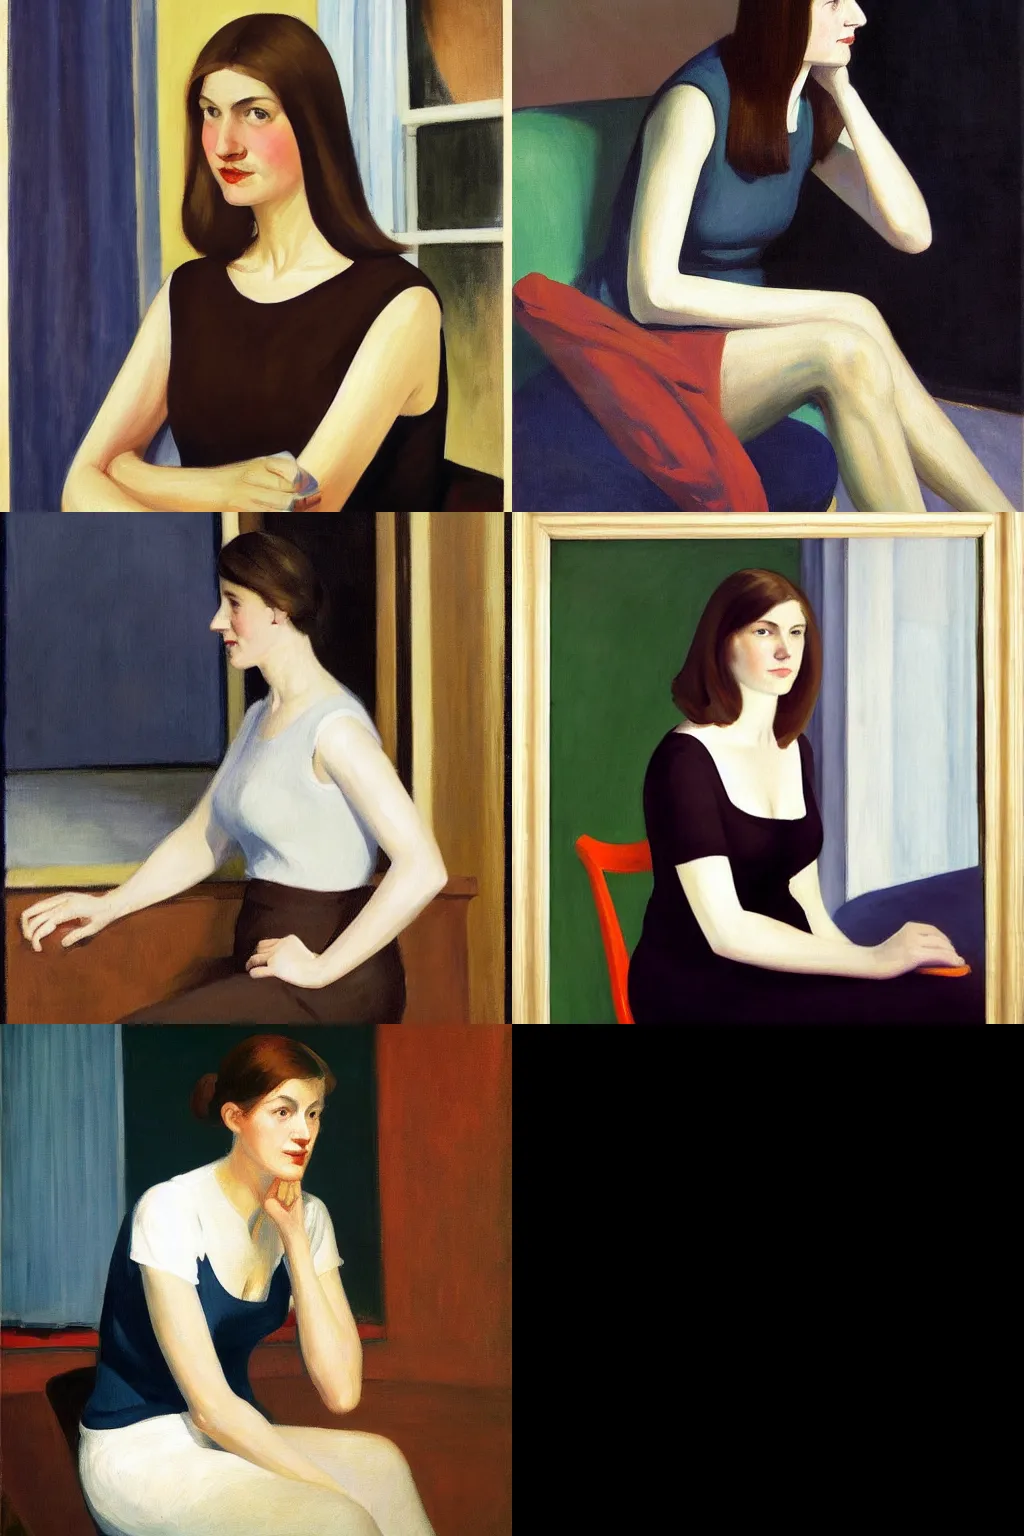 Prompt: an hd painting of a woman by edward hopper. she has straight long dark brown hair, parted in the middle. she has large dark brown eyes, a small refined nose, and thin lips. she is wearing a sleeveless white blouse, a pair of dark brown capris, and black loafers.